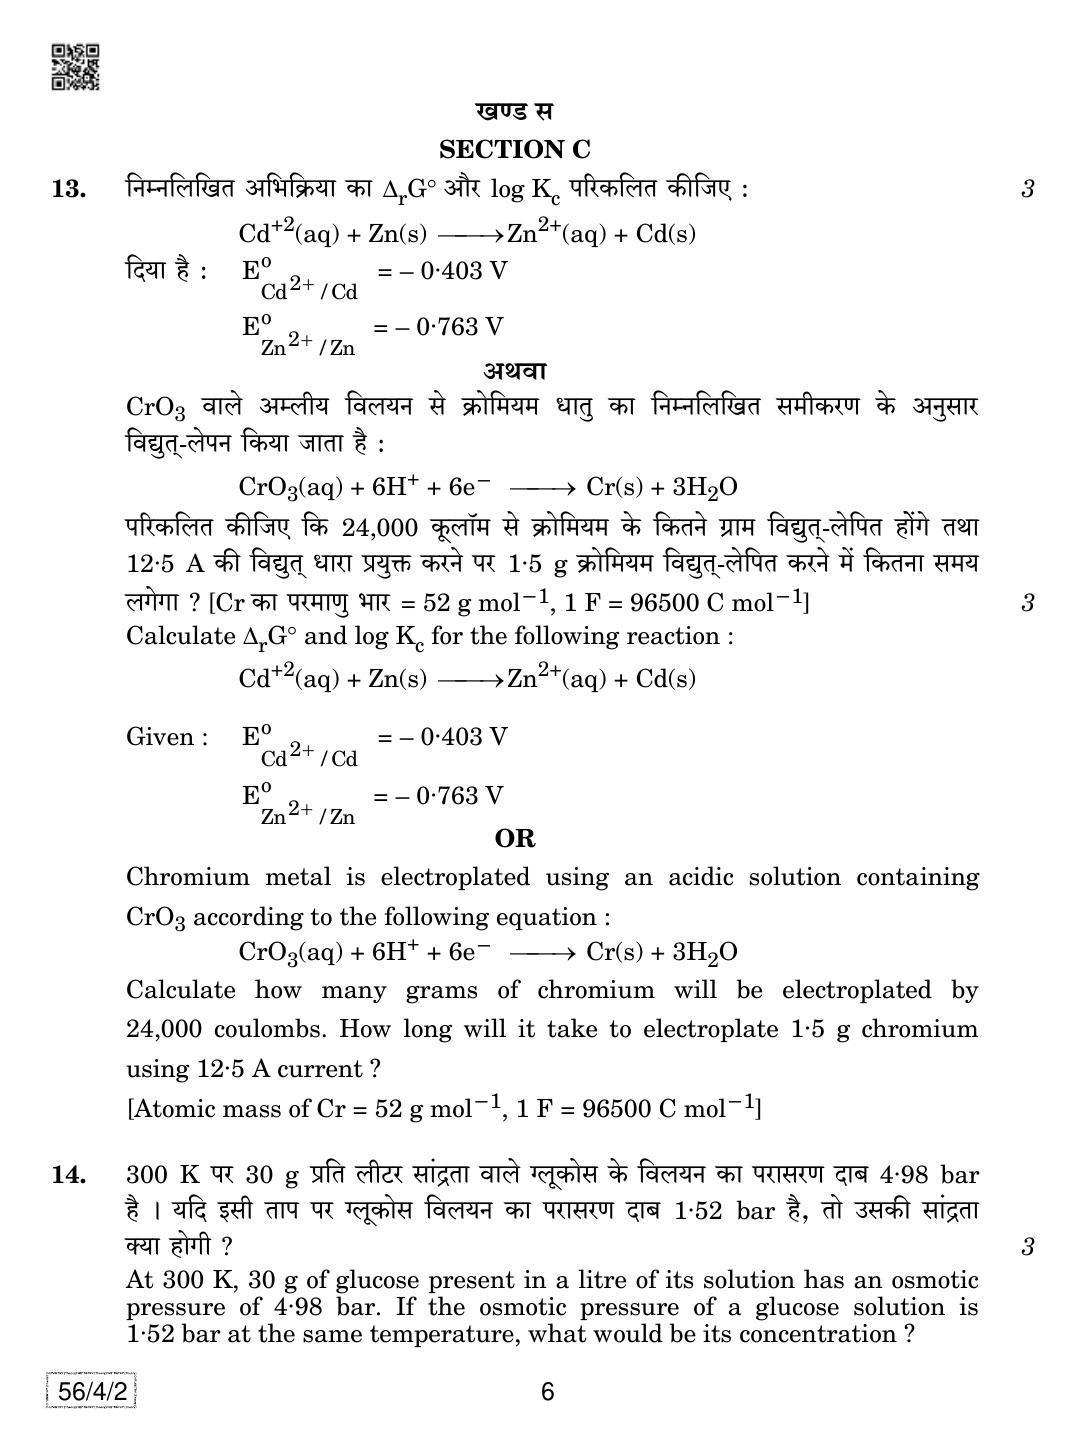 CBSE Class 12 56-4-2 Chemistry 2019 Question Paper - Page 6